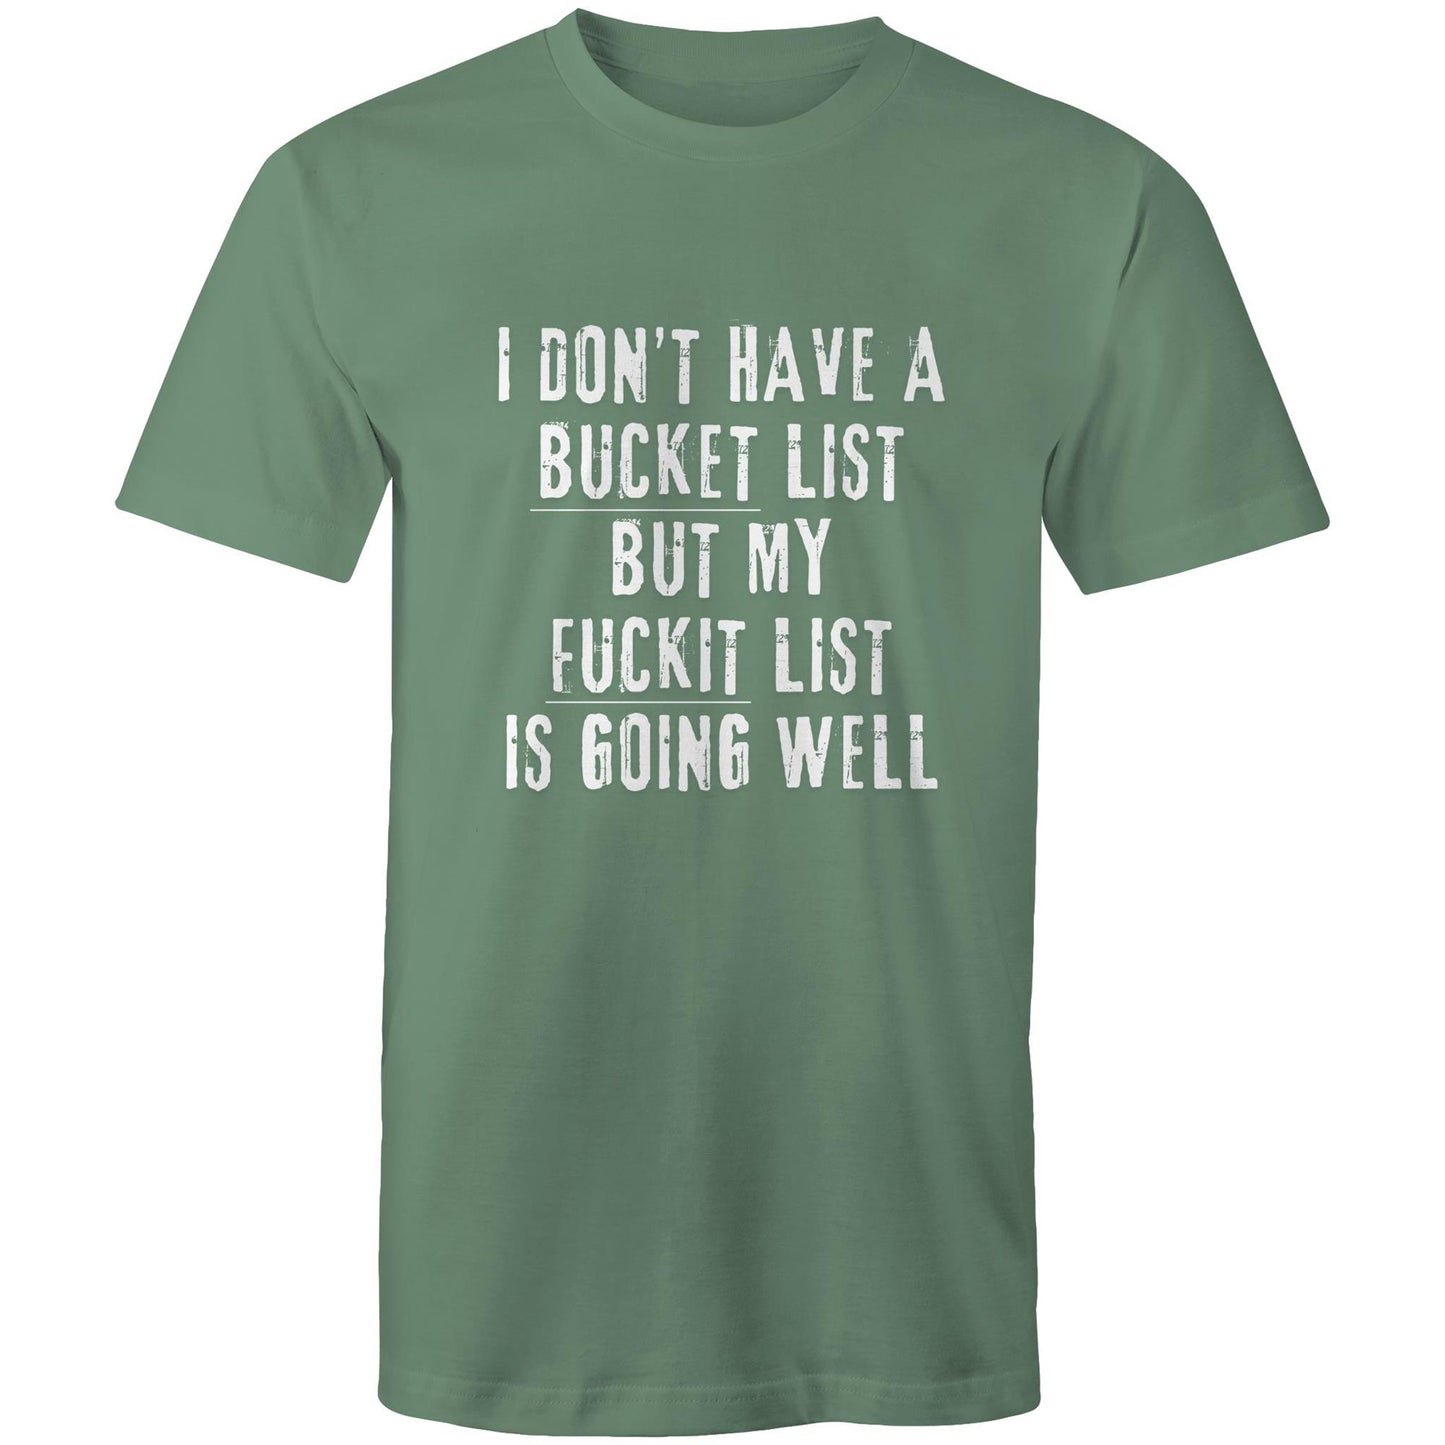 I Don't Have a Bucket List - Mens T-Shirt